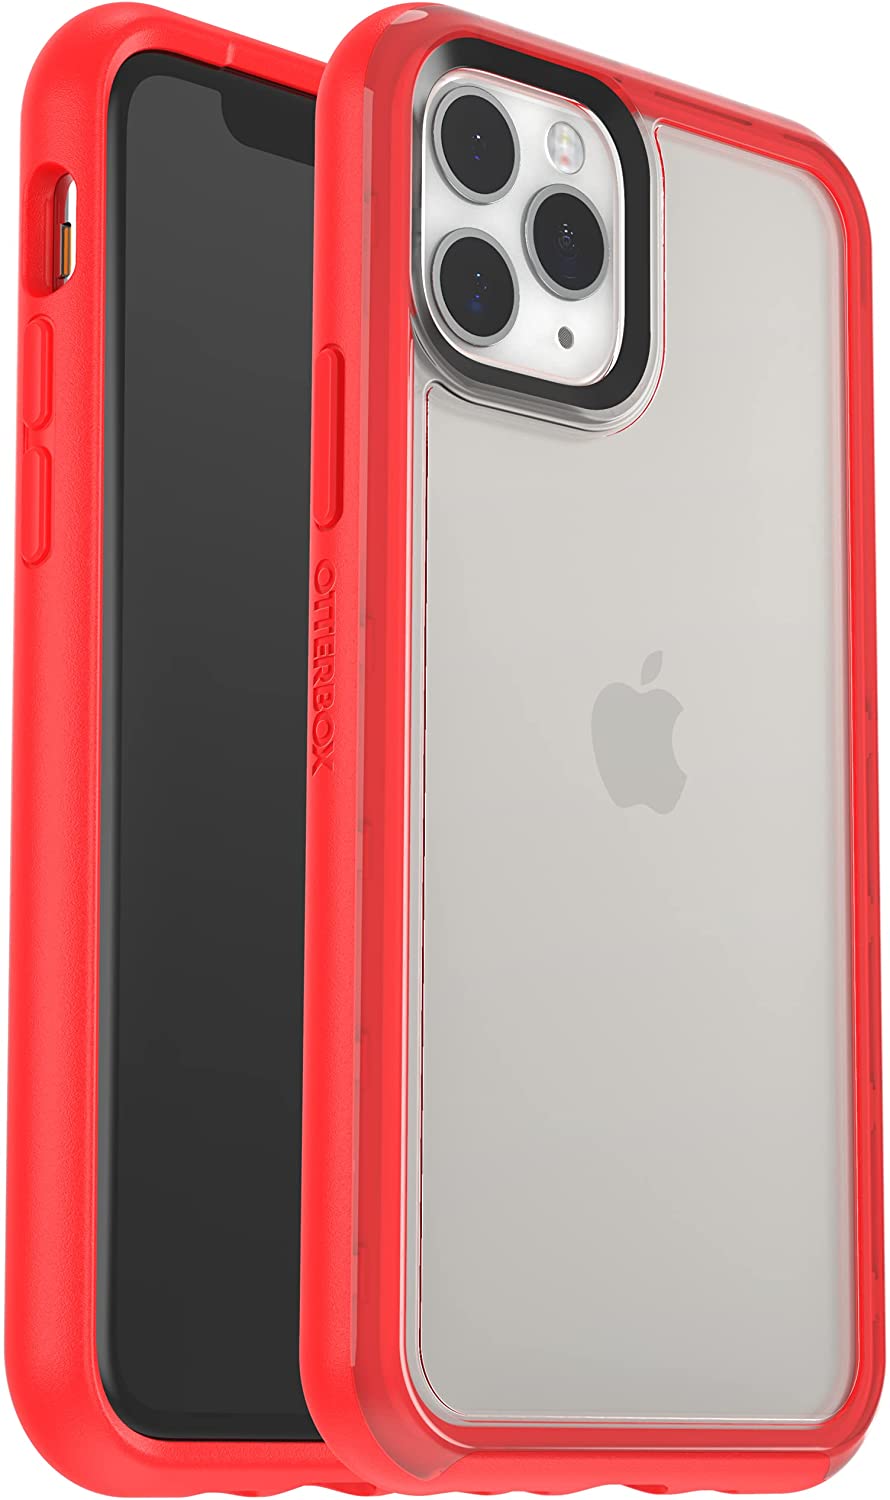 OtterBox Clear Protective Case for Apple iPhone 11 Pro - Red Hot (New)